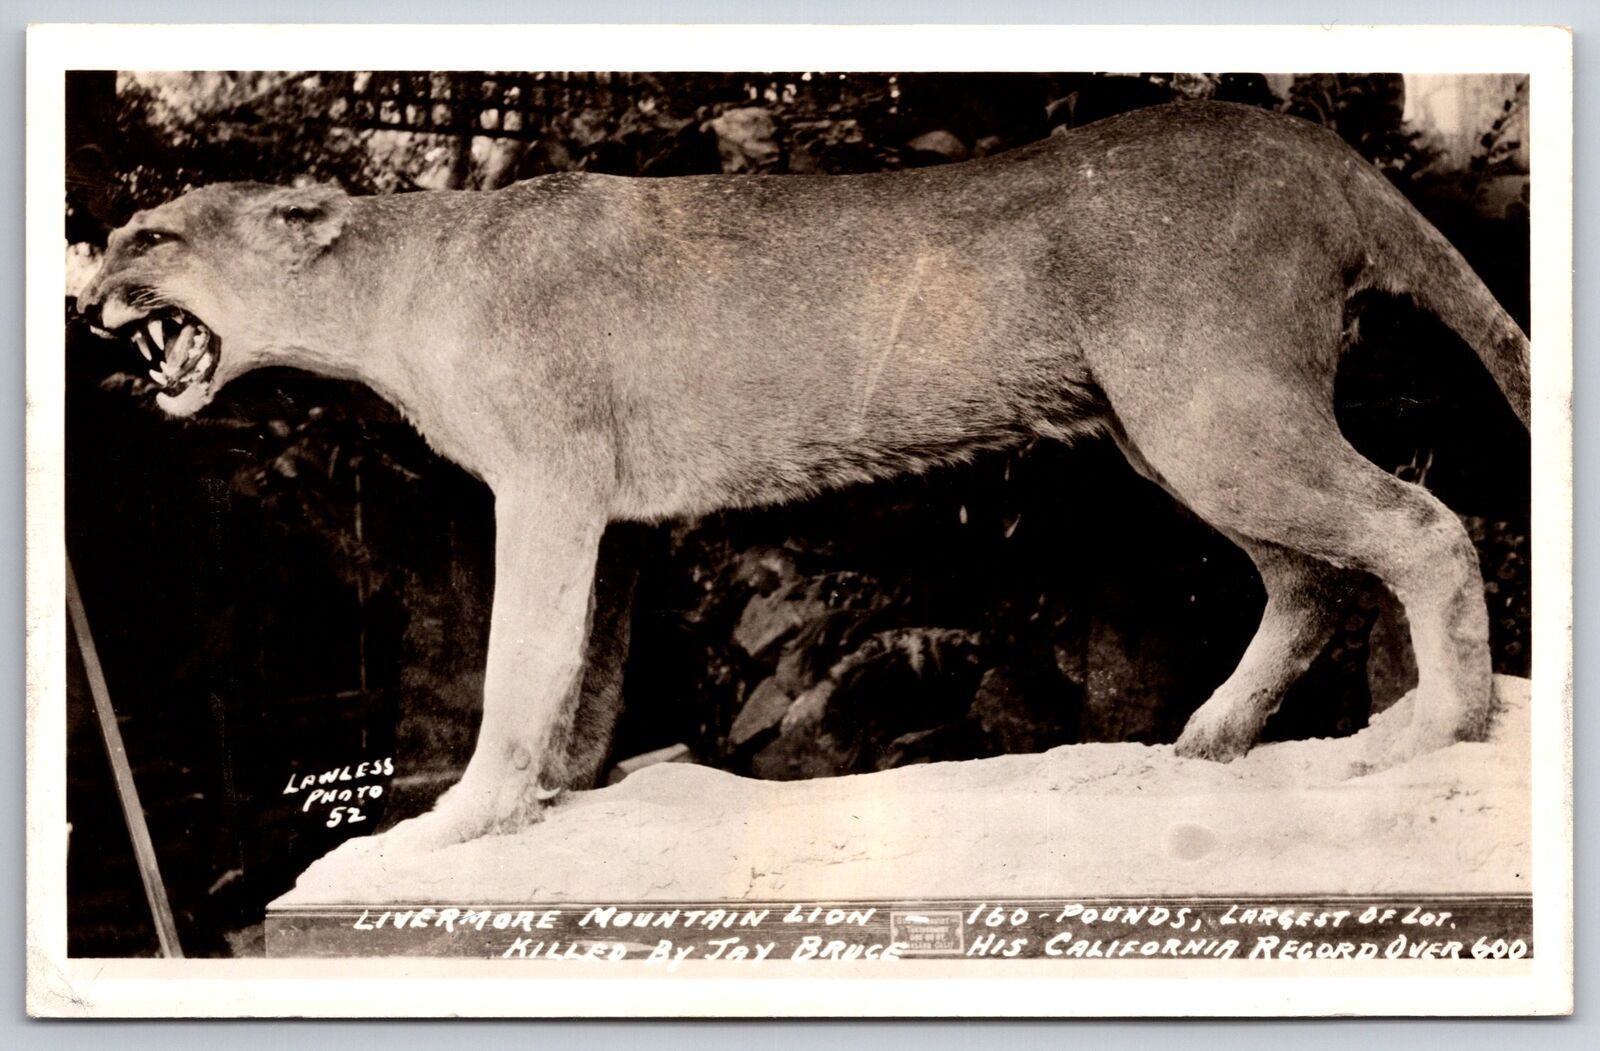 California~Mounted Livermore Mountain Lion~Killed by Hunter Jay Bruce~1940s RPPC